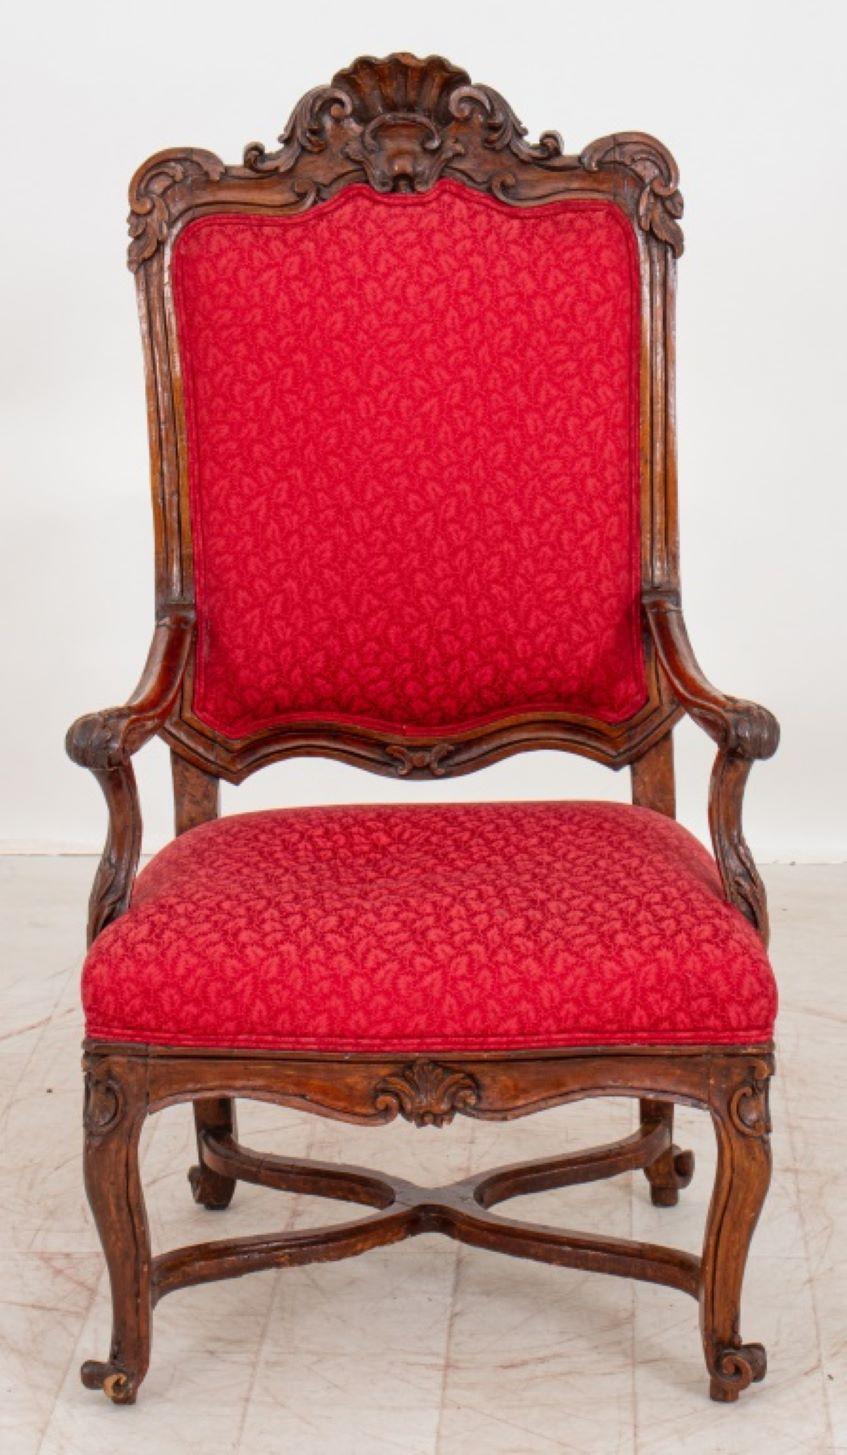 Regence Carved Fauteuil a la Reine, with ornate crestrail with carved rocailles, largely 18th century with 19th century restorations, above a damask upholstered back with down swept arms terminating in scrolling volutes, above a damask seat on shell